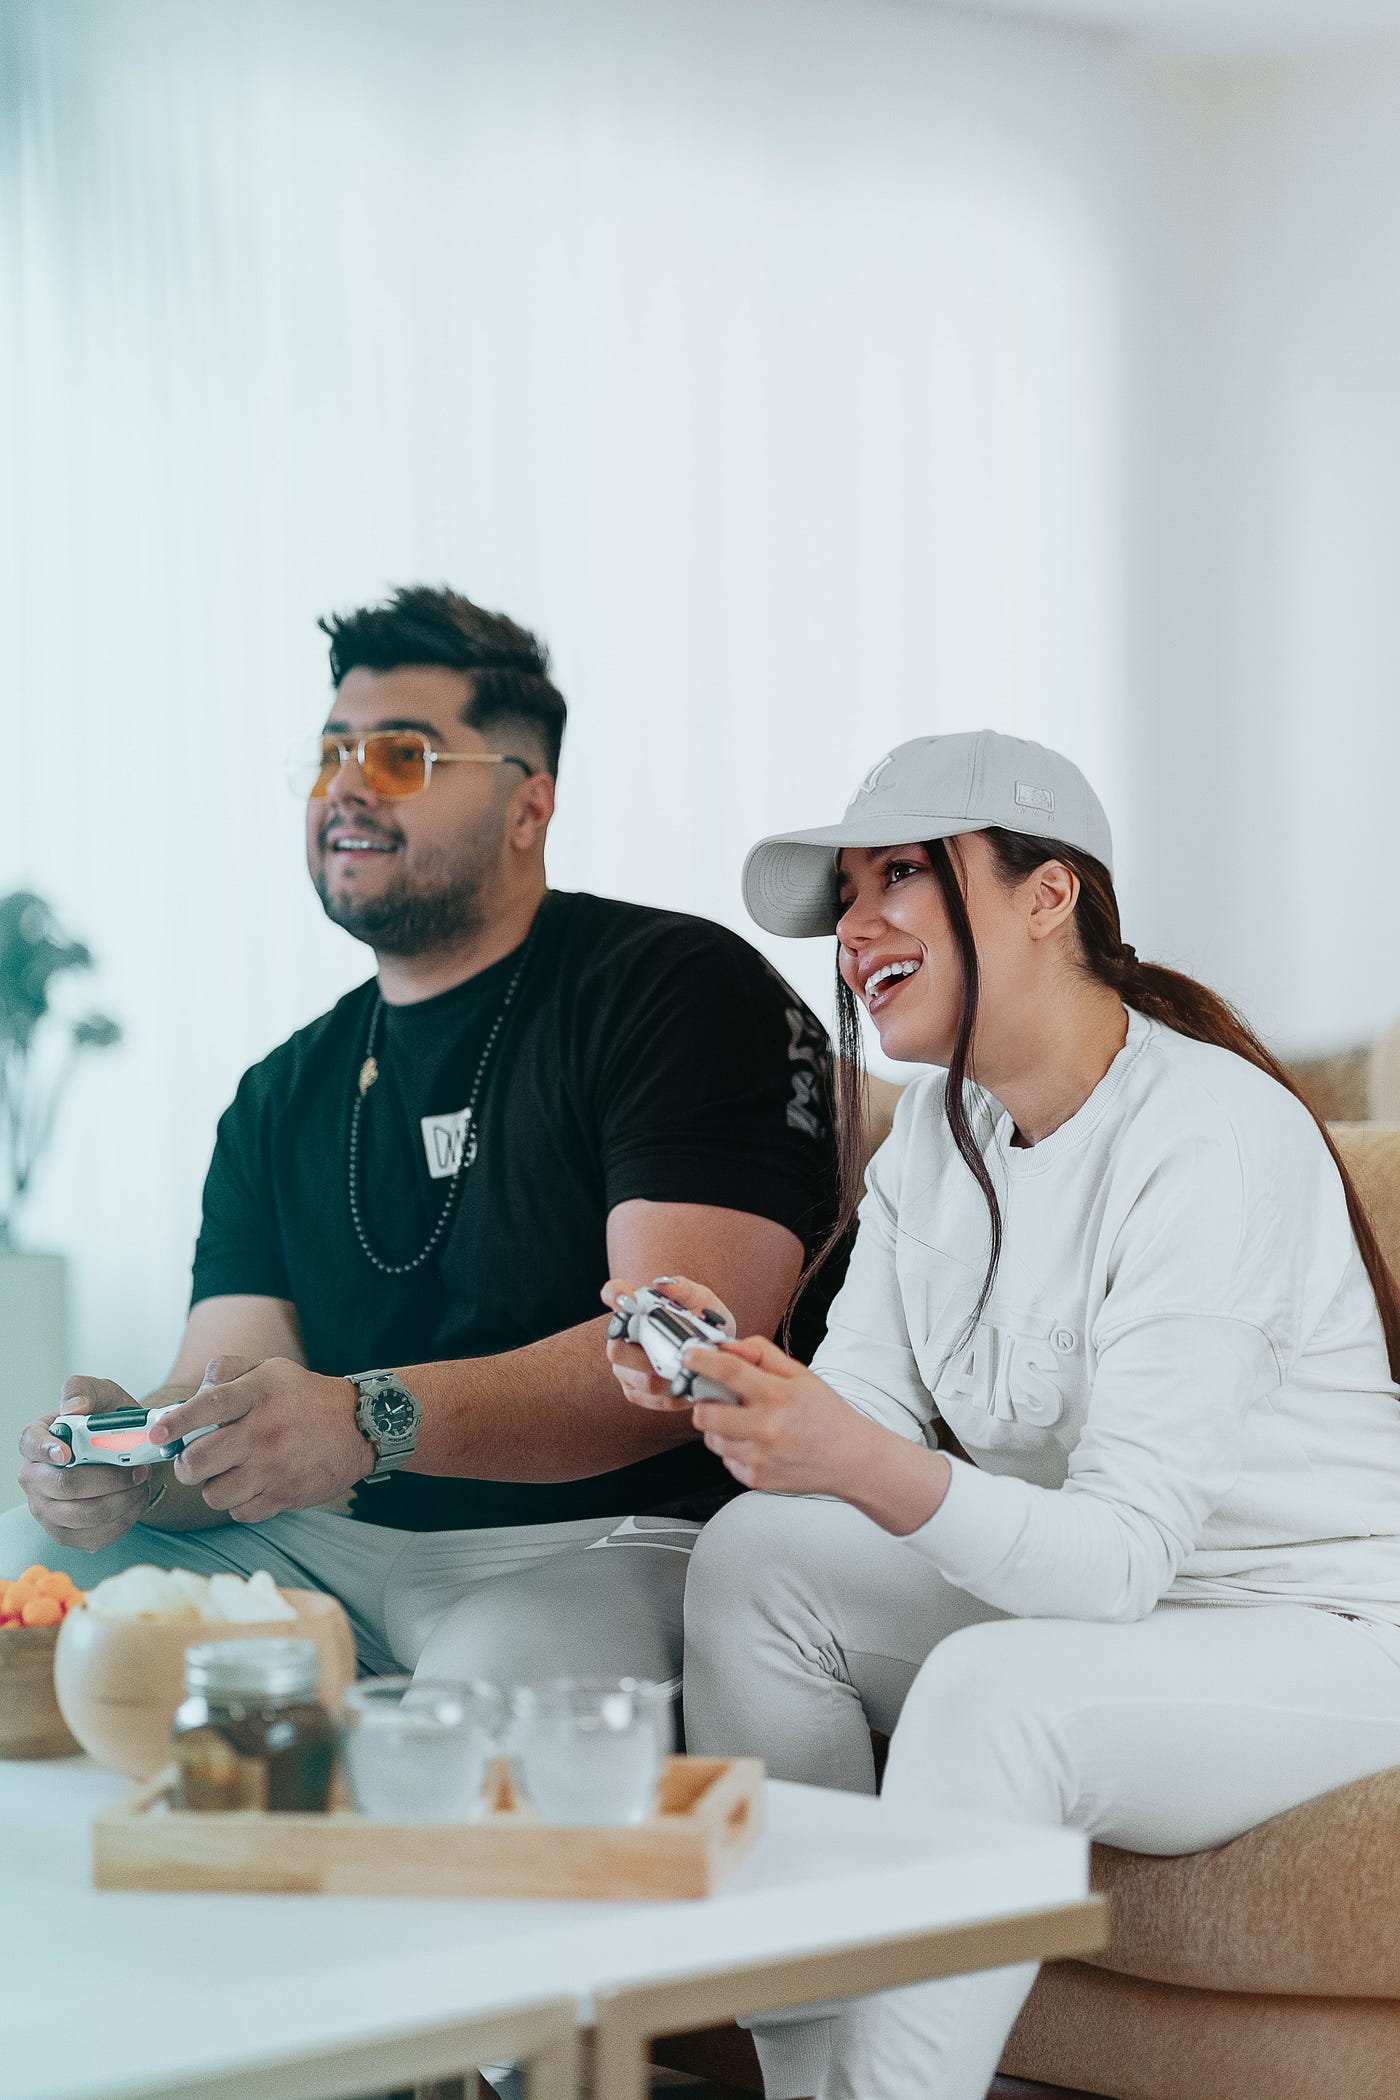 Best Co-Op Games To Play With Your Partner